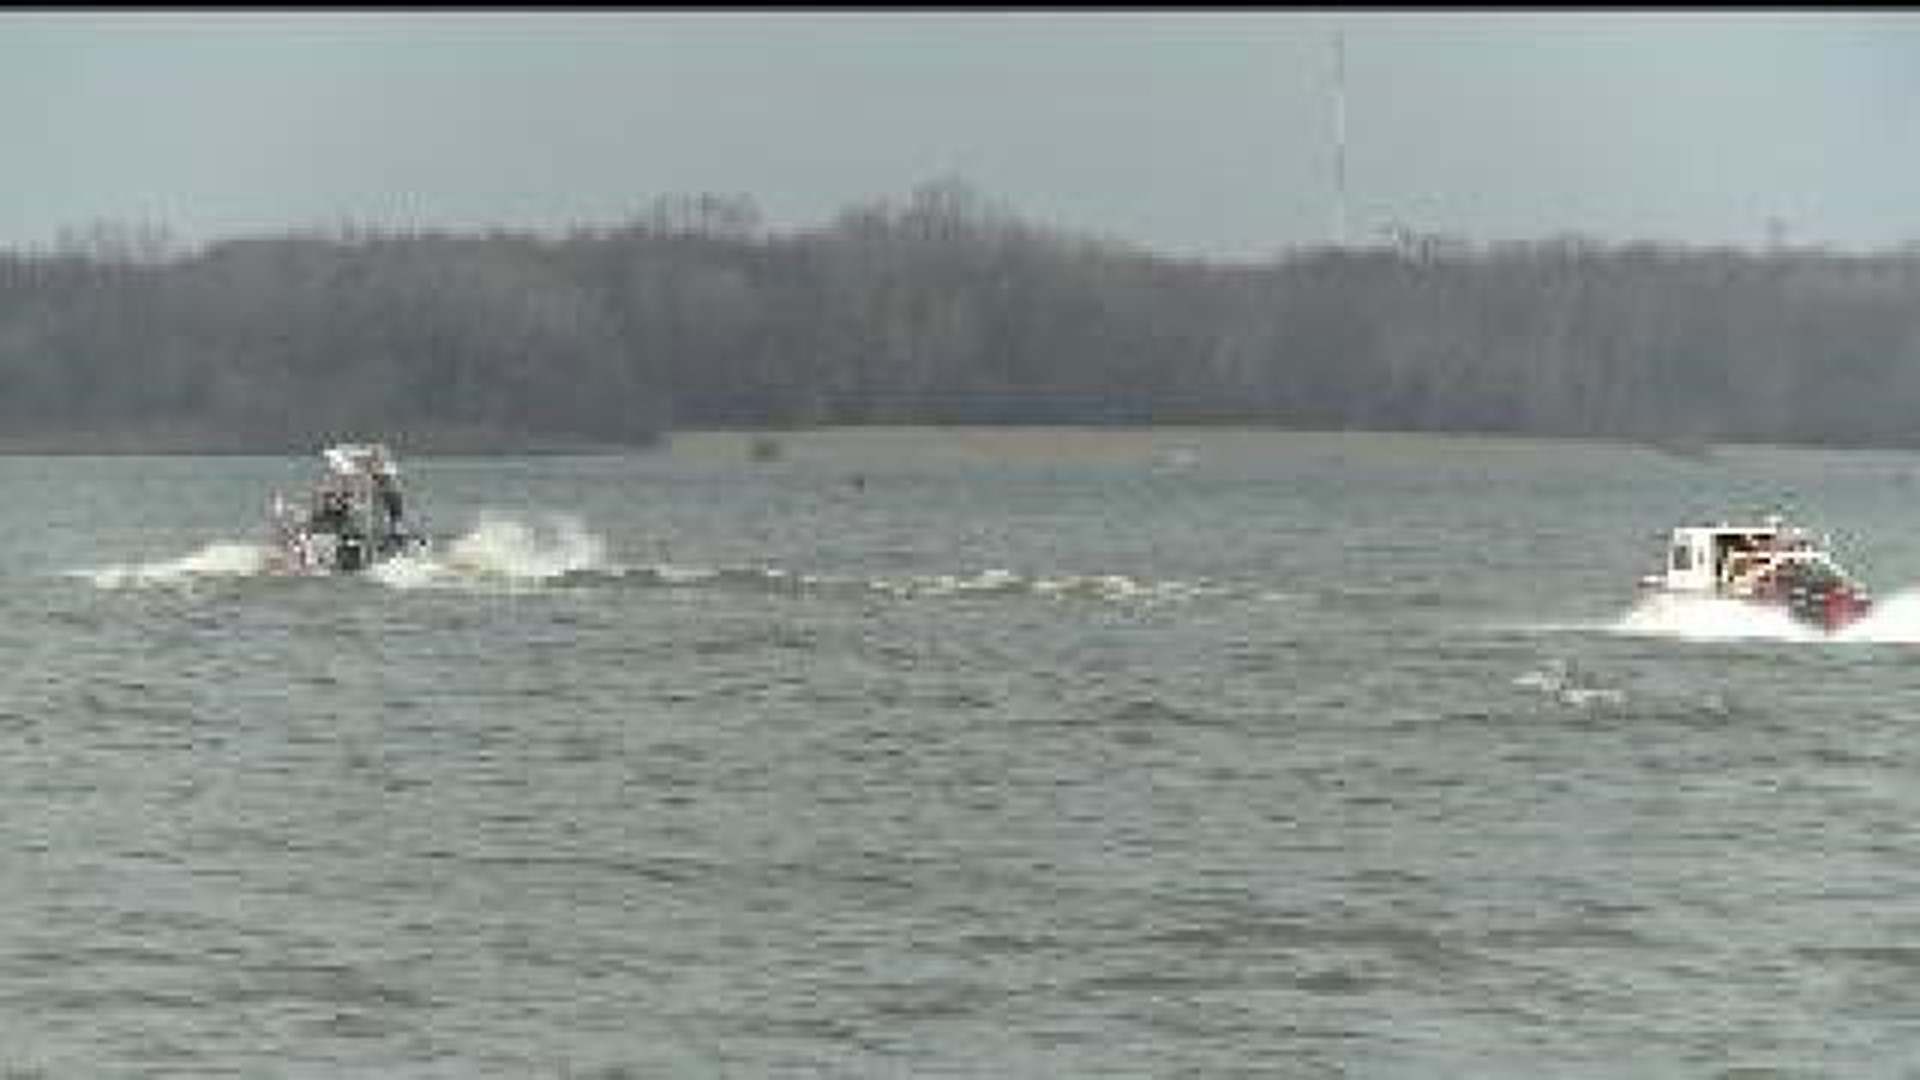 Search crews recover body from Mississippi River